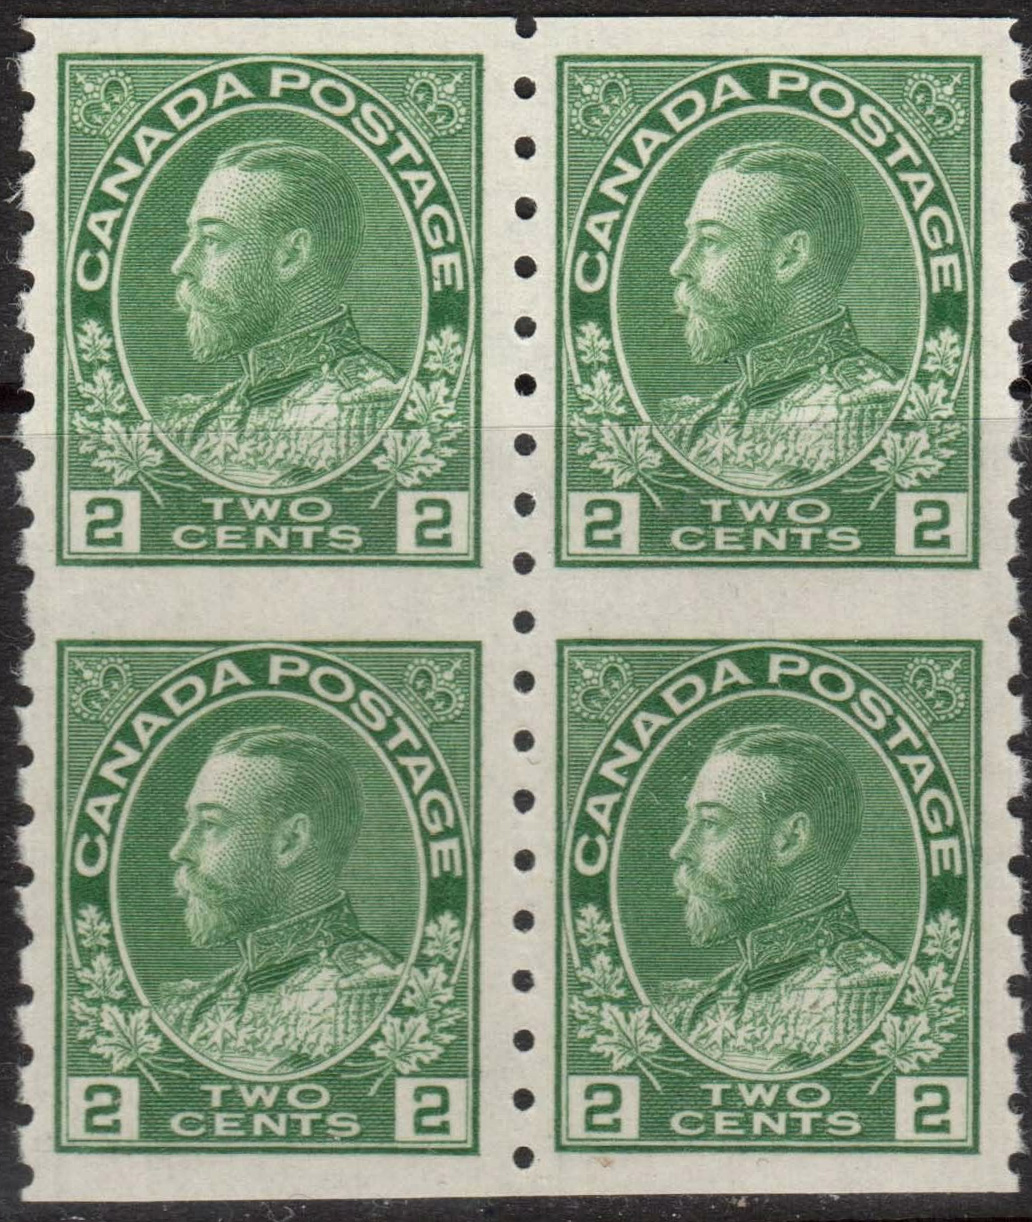 Roi Georges V - 2 cents 1922 - Timbre du Canada - Block of 4 - 128a